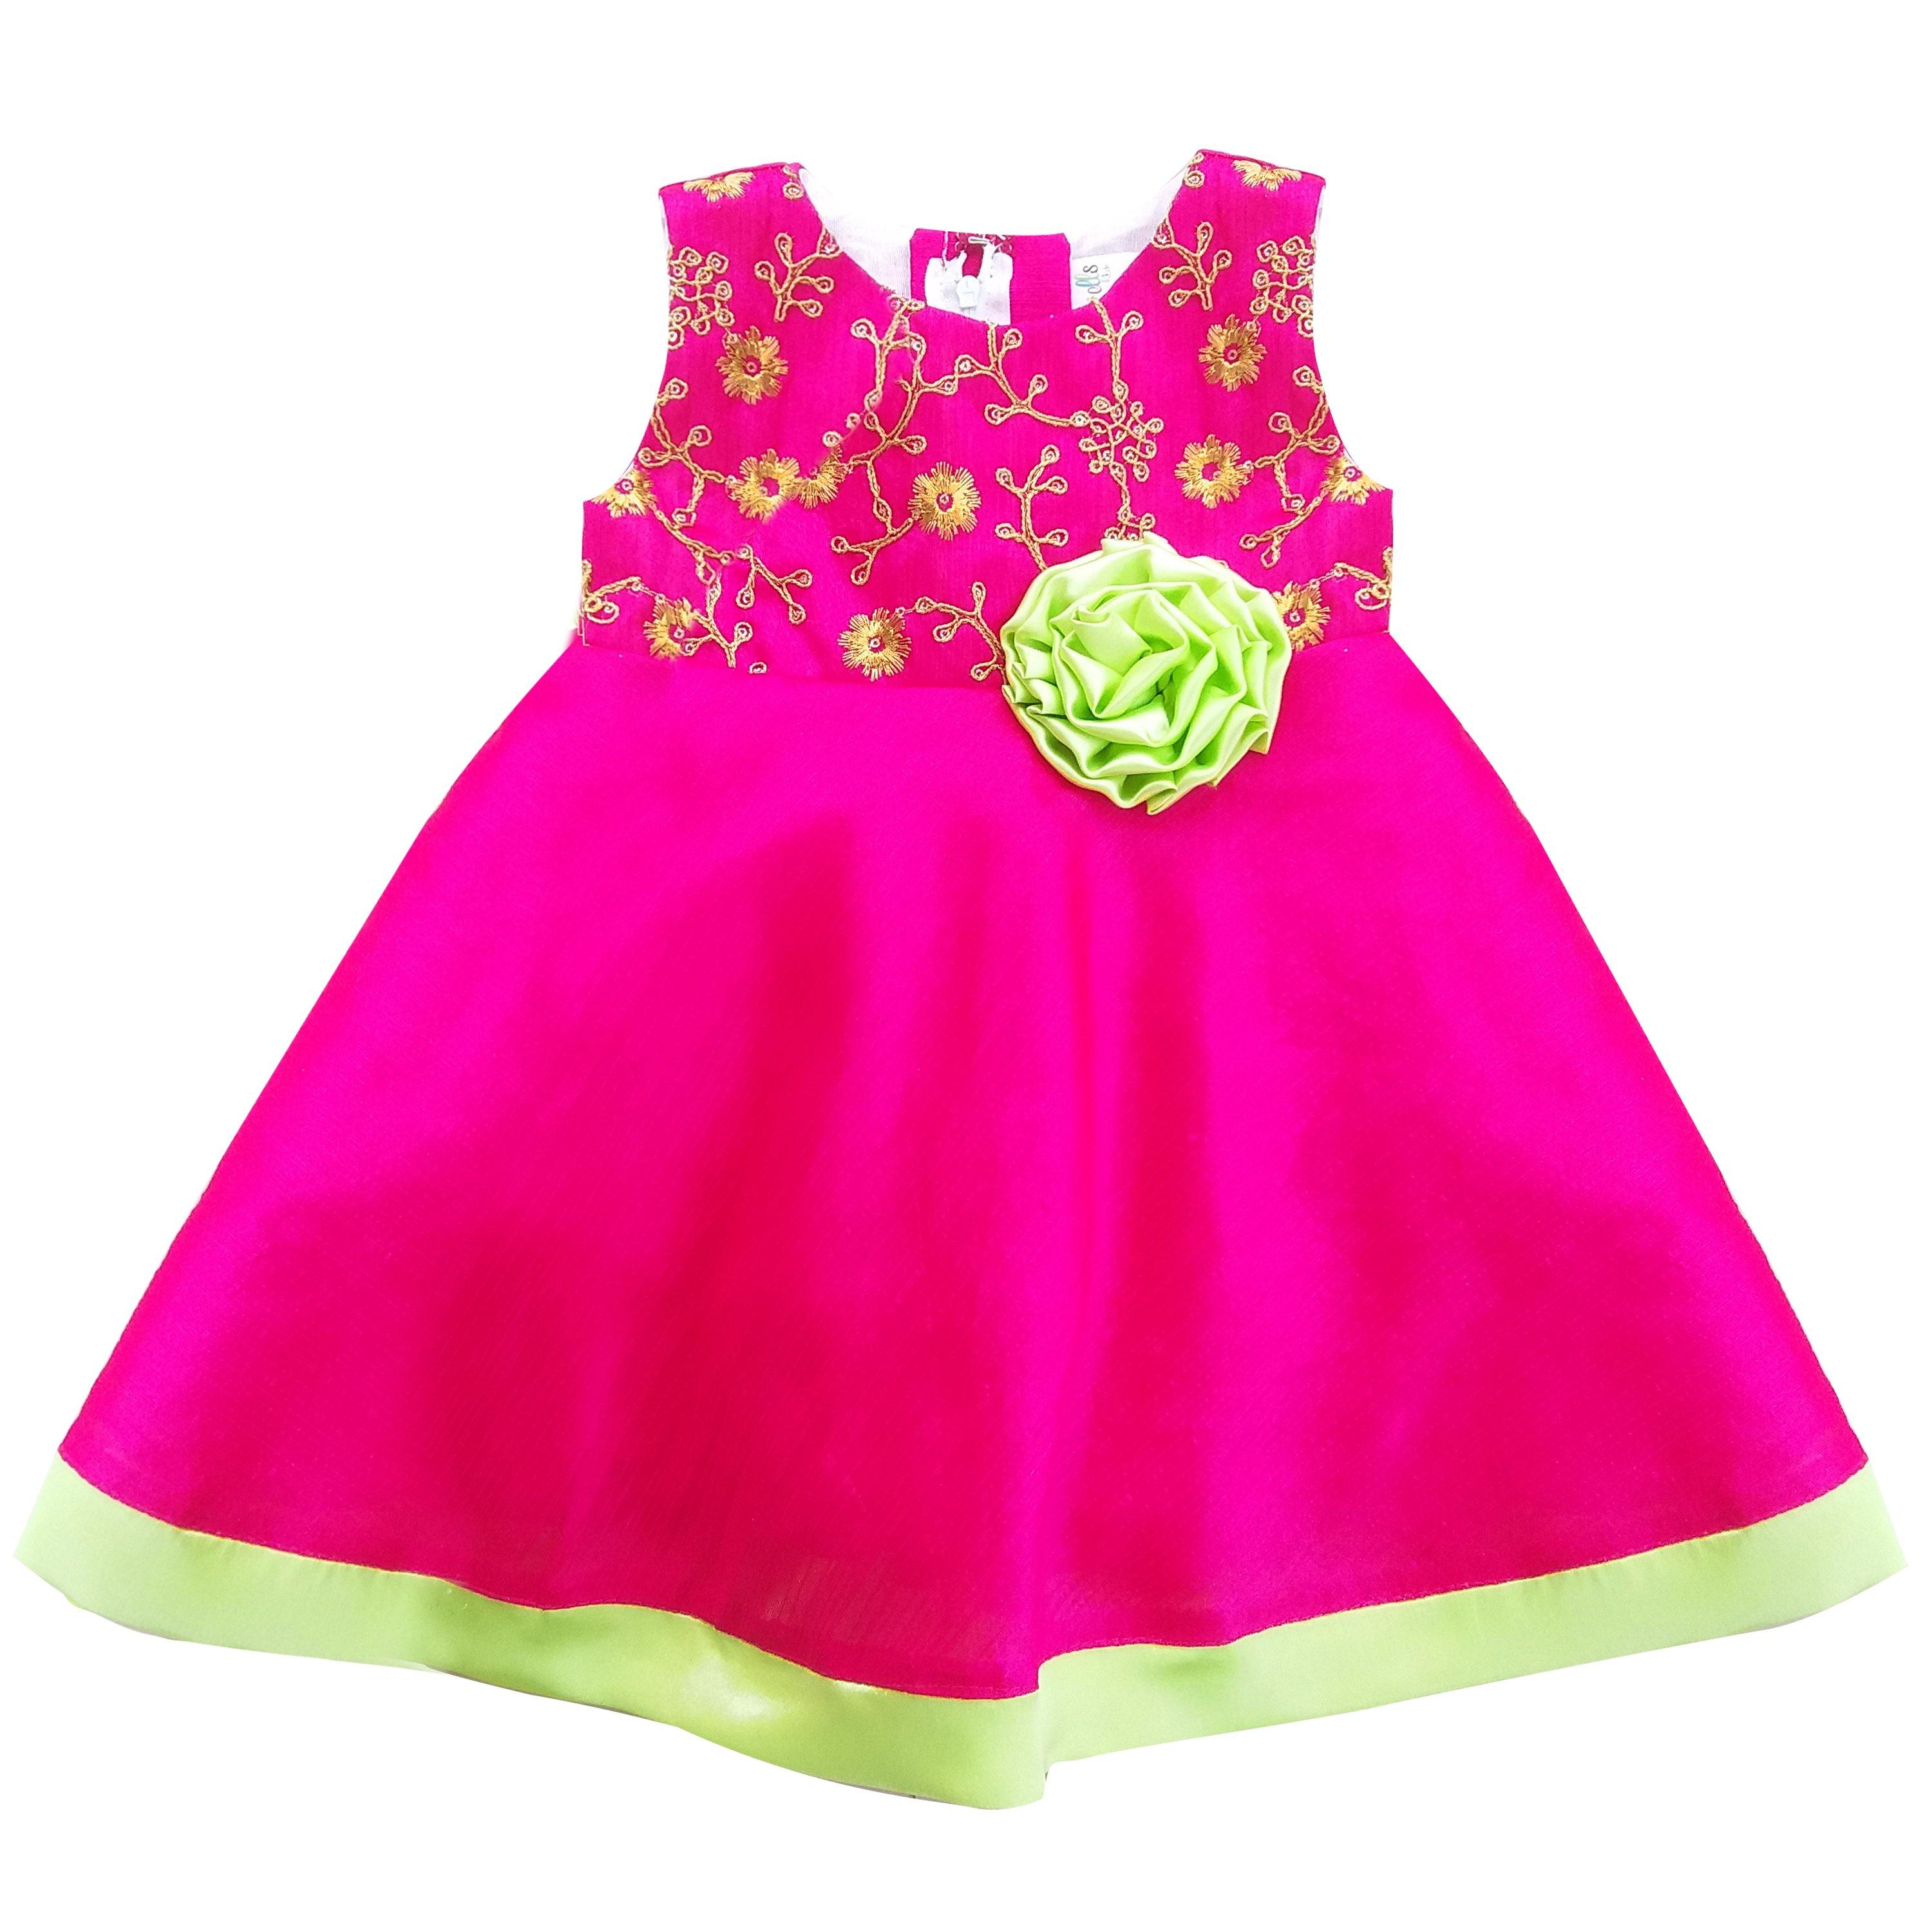 Comfortable Baby Girl Frock Design||Beautiful Kid's Outfits||Most Demanding  Collection | Baby girl frock design, Girls frock design, Pretty dresses for  kids